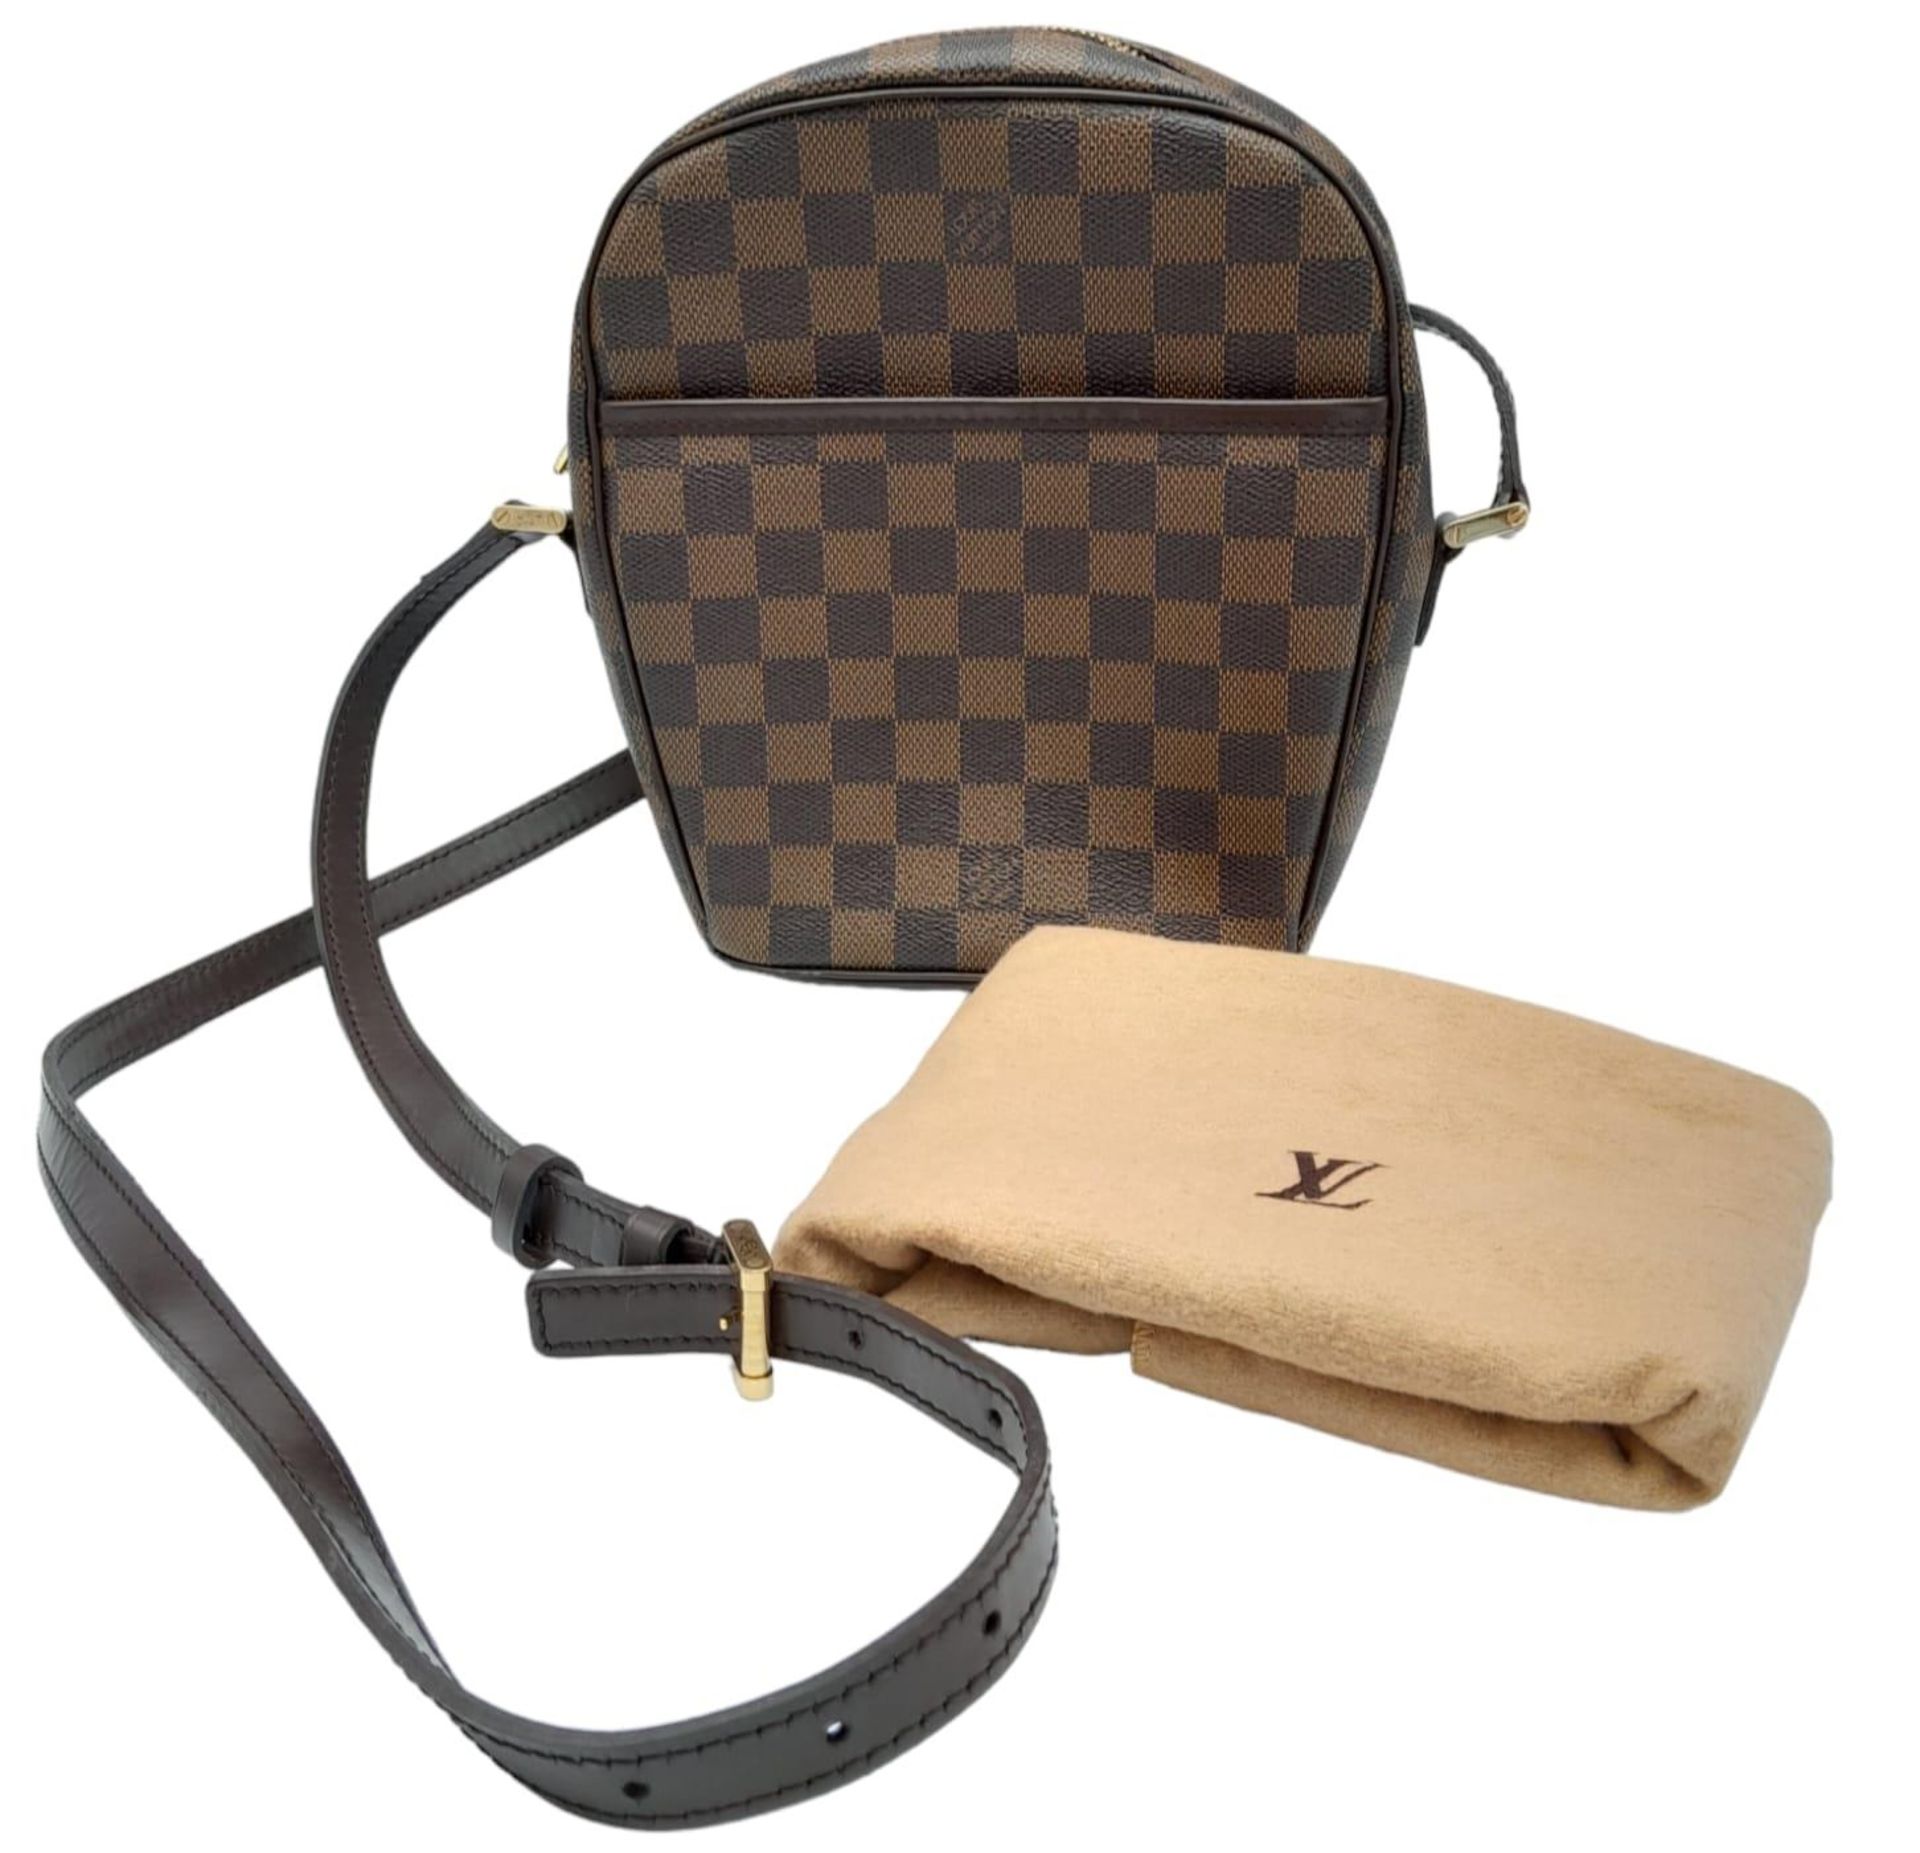 A Louis Vuitton Damier Ebene 'Ipanema' Crossbody Bag. Leather exterior with gold-toned hardware, - Image 2 of 8